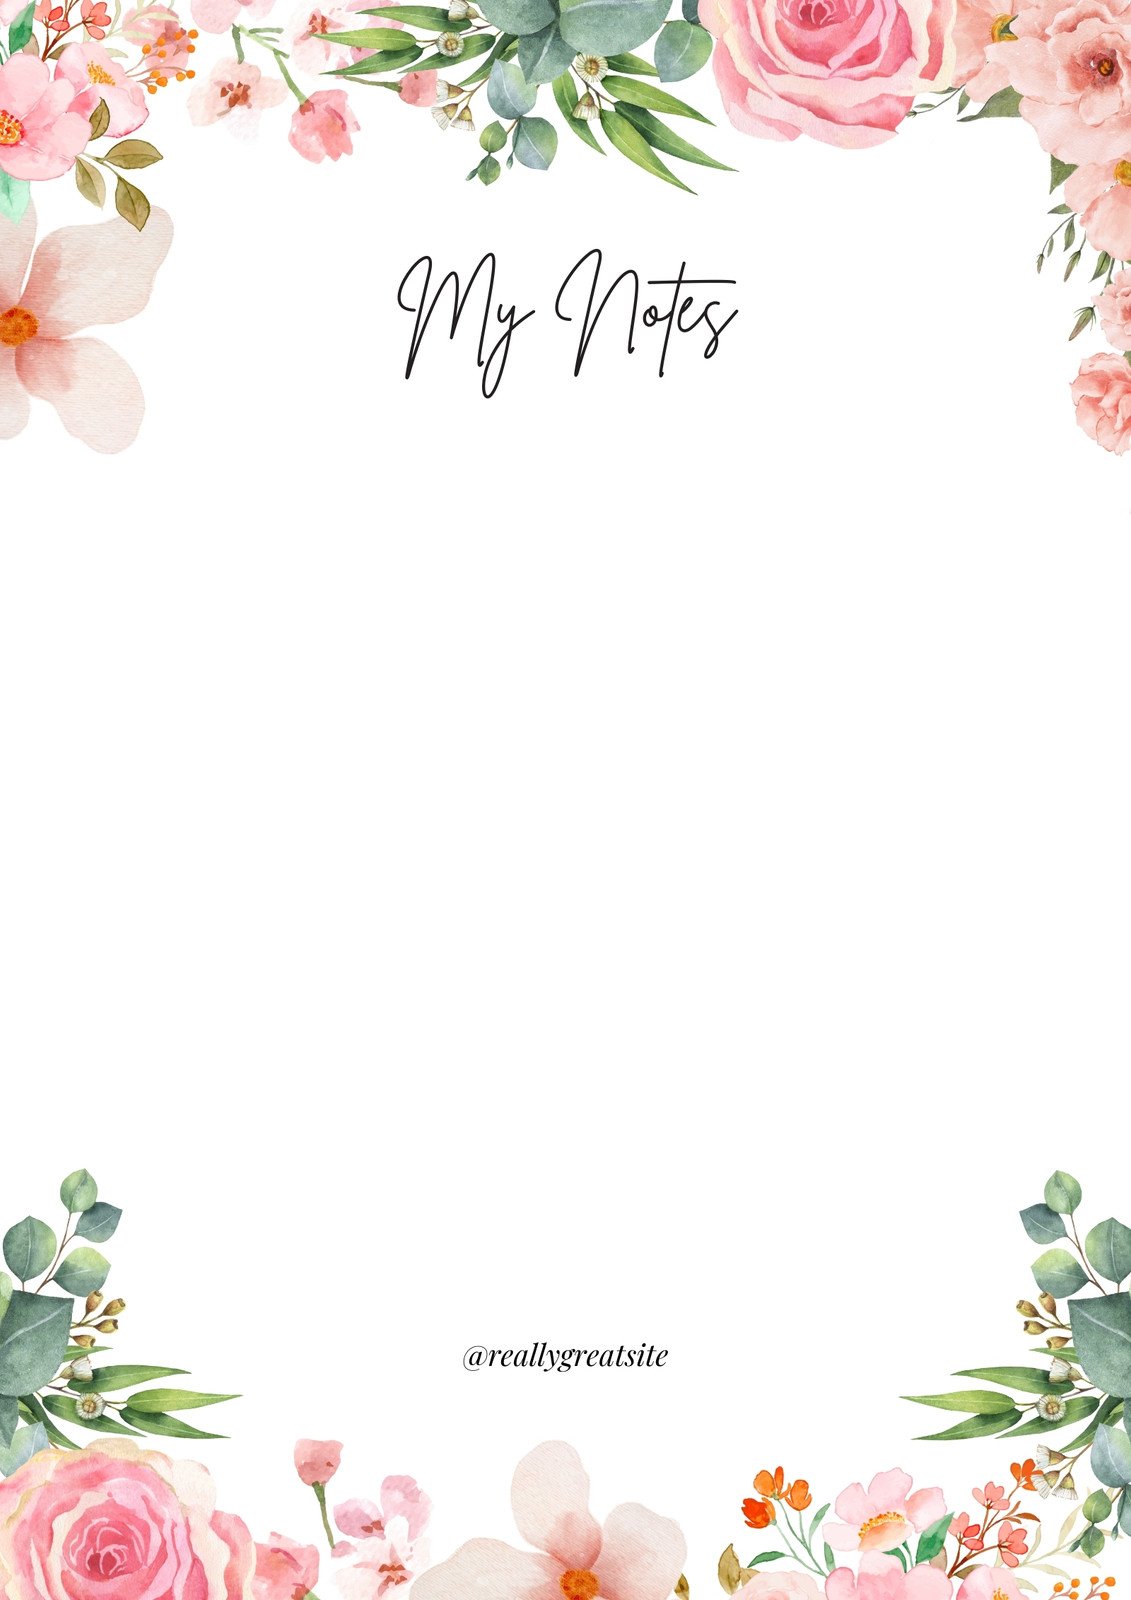 Premium Vector  Paper flower white roses cut from paper wedding  decorations greeting card template blank floral